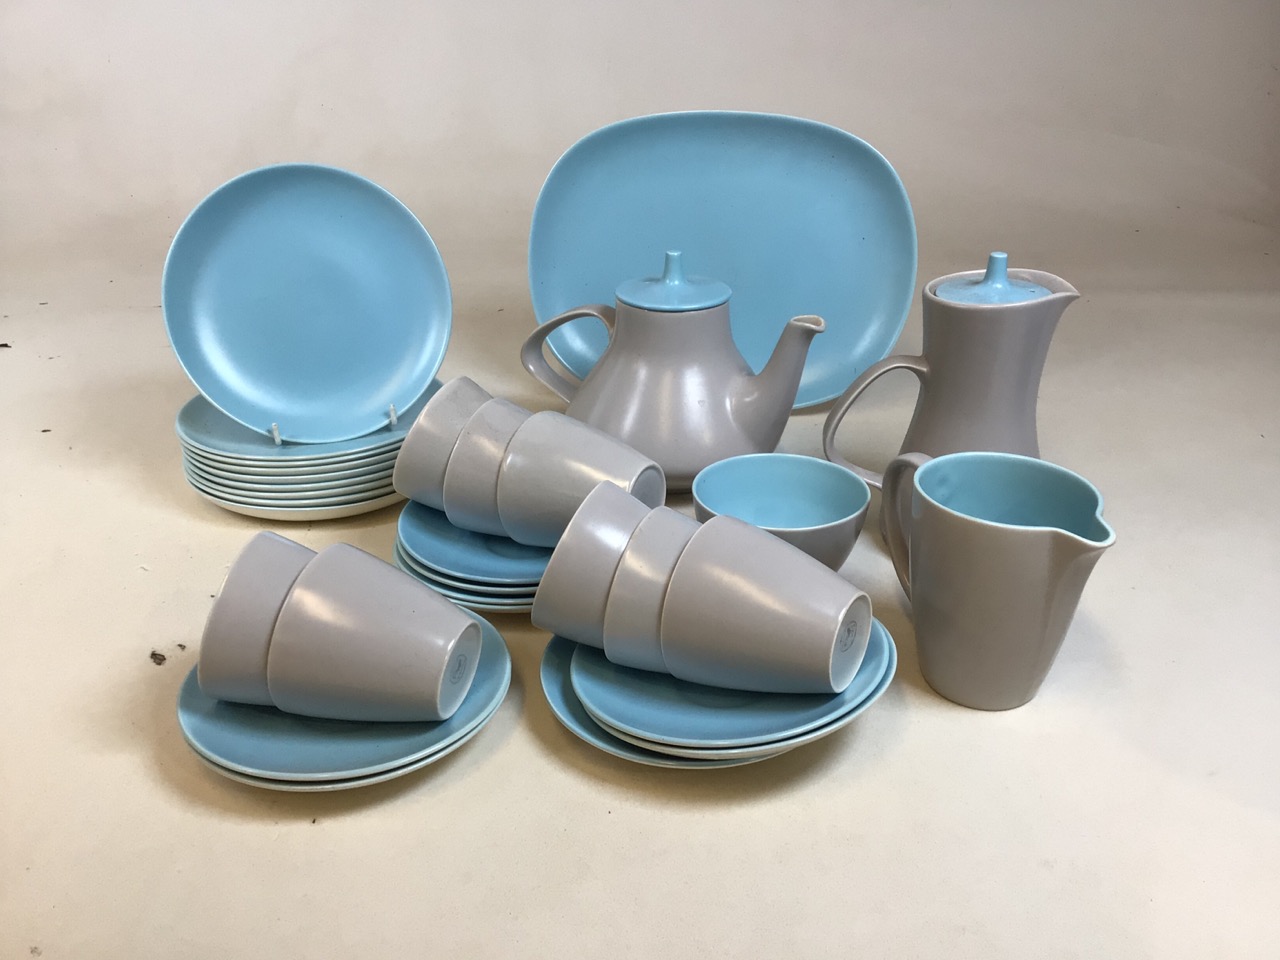 Poole pottery blue and grey two tone tea set includes teapot and hot water pot, tea cups and